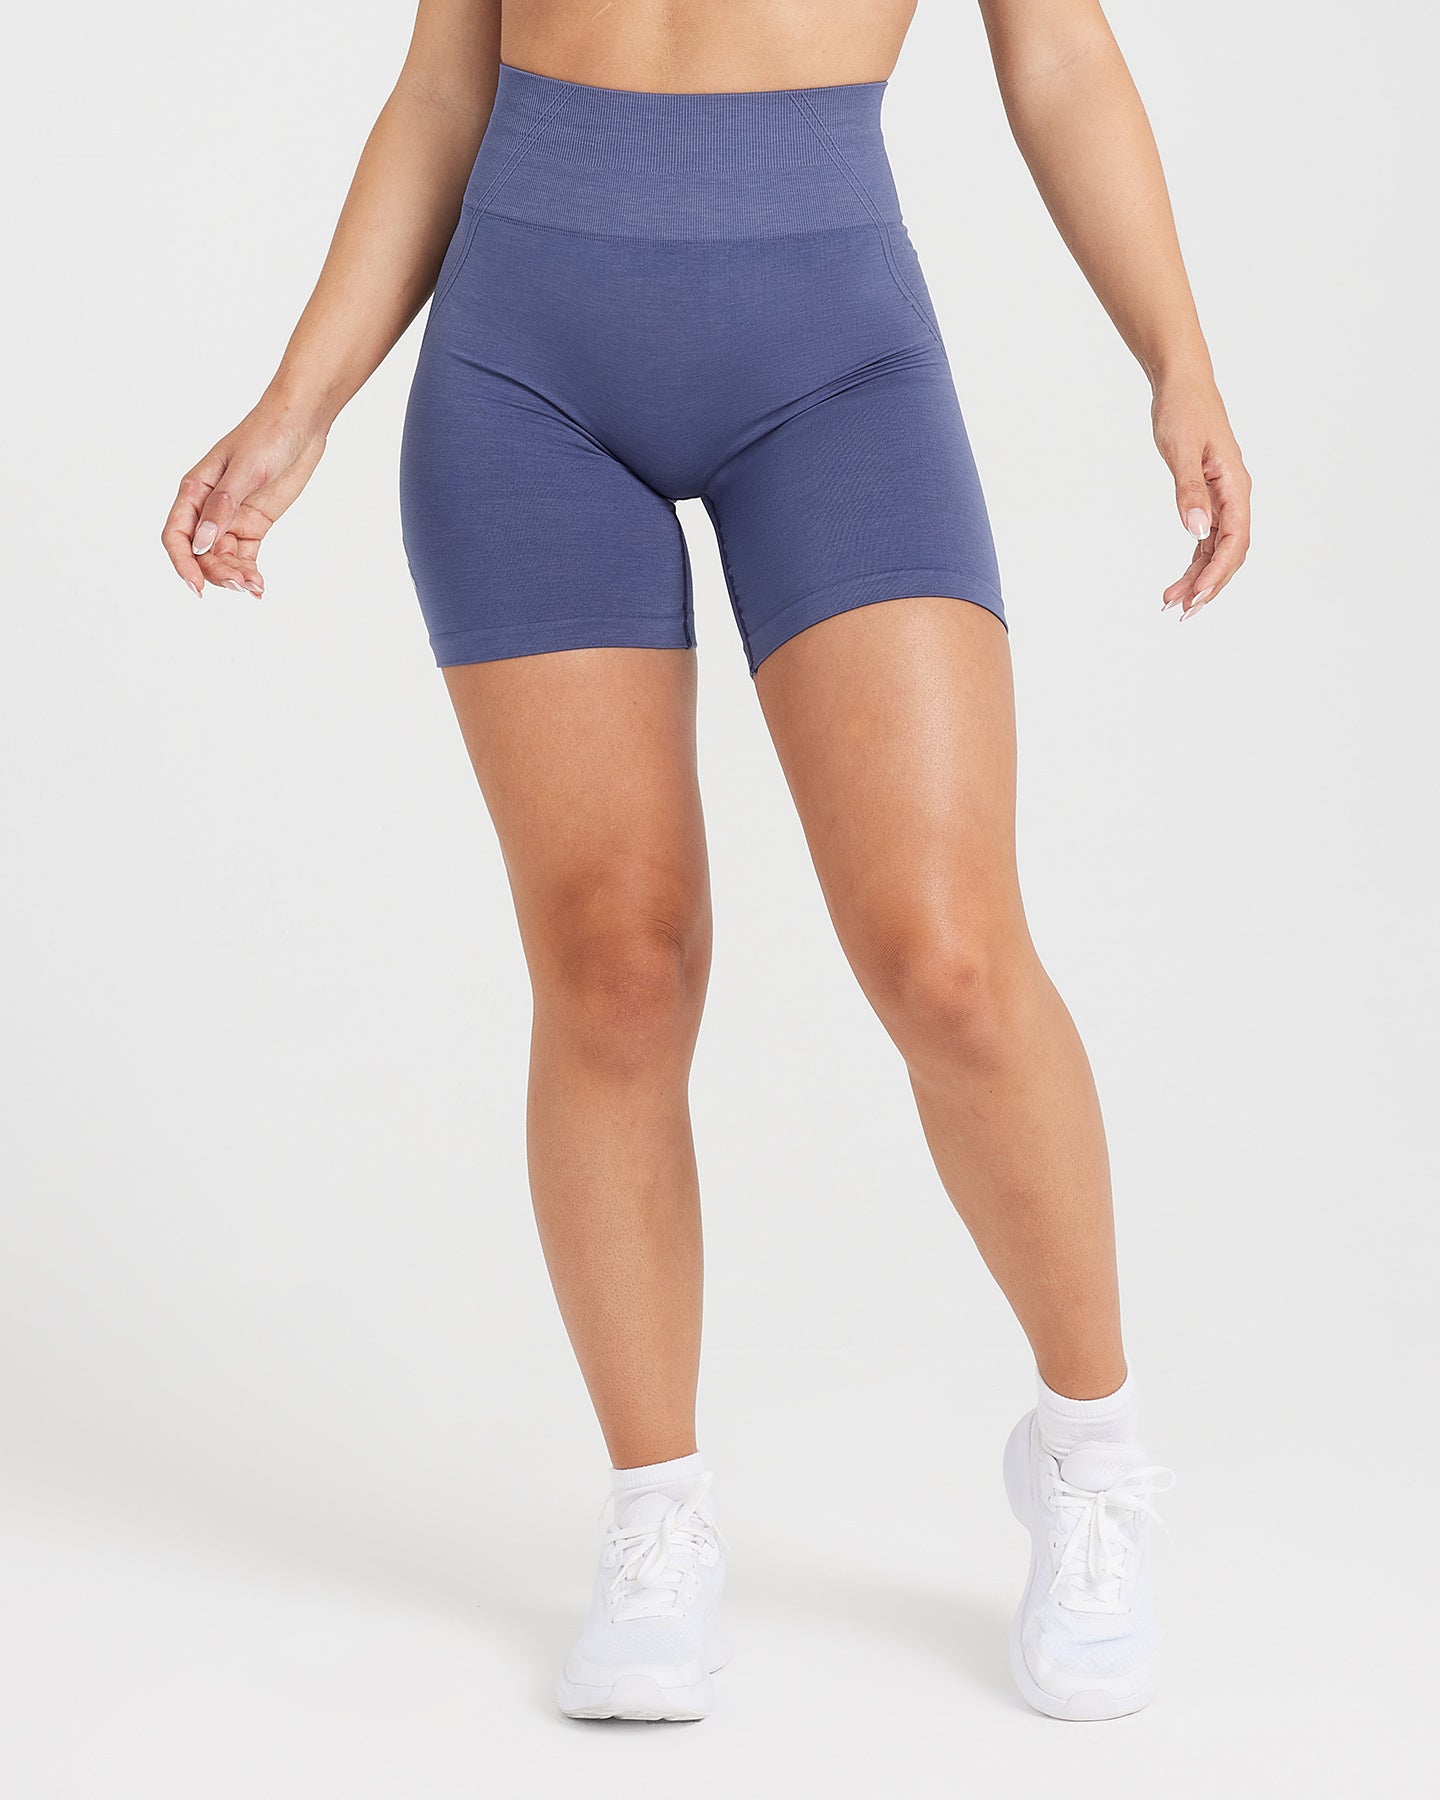 Oner Active US | Blue for Shorts - Women Slate Cycling